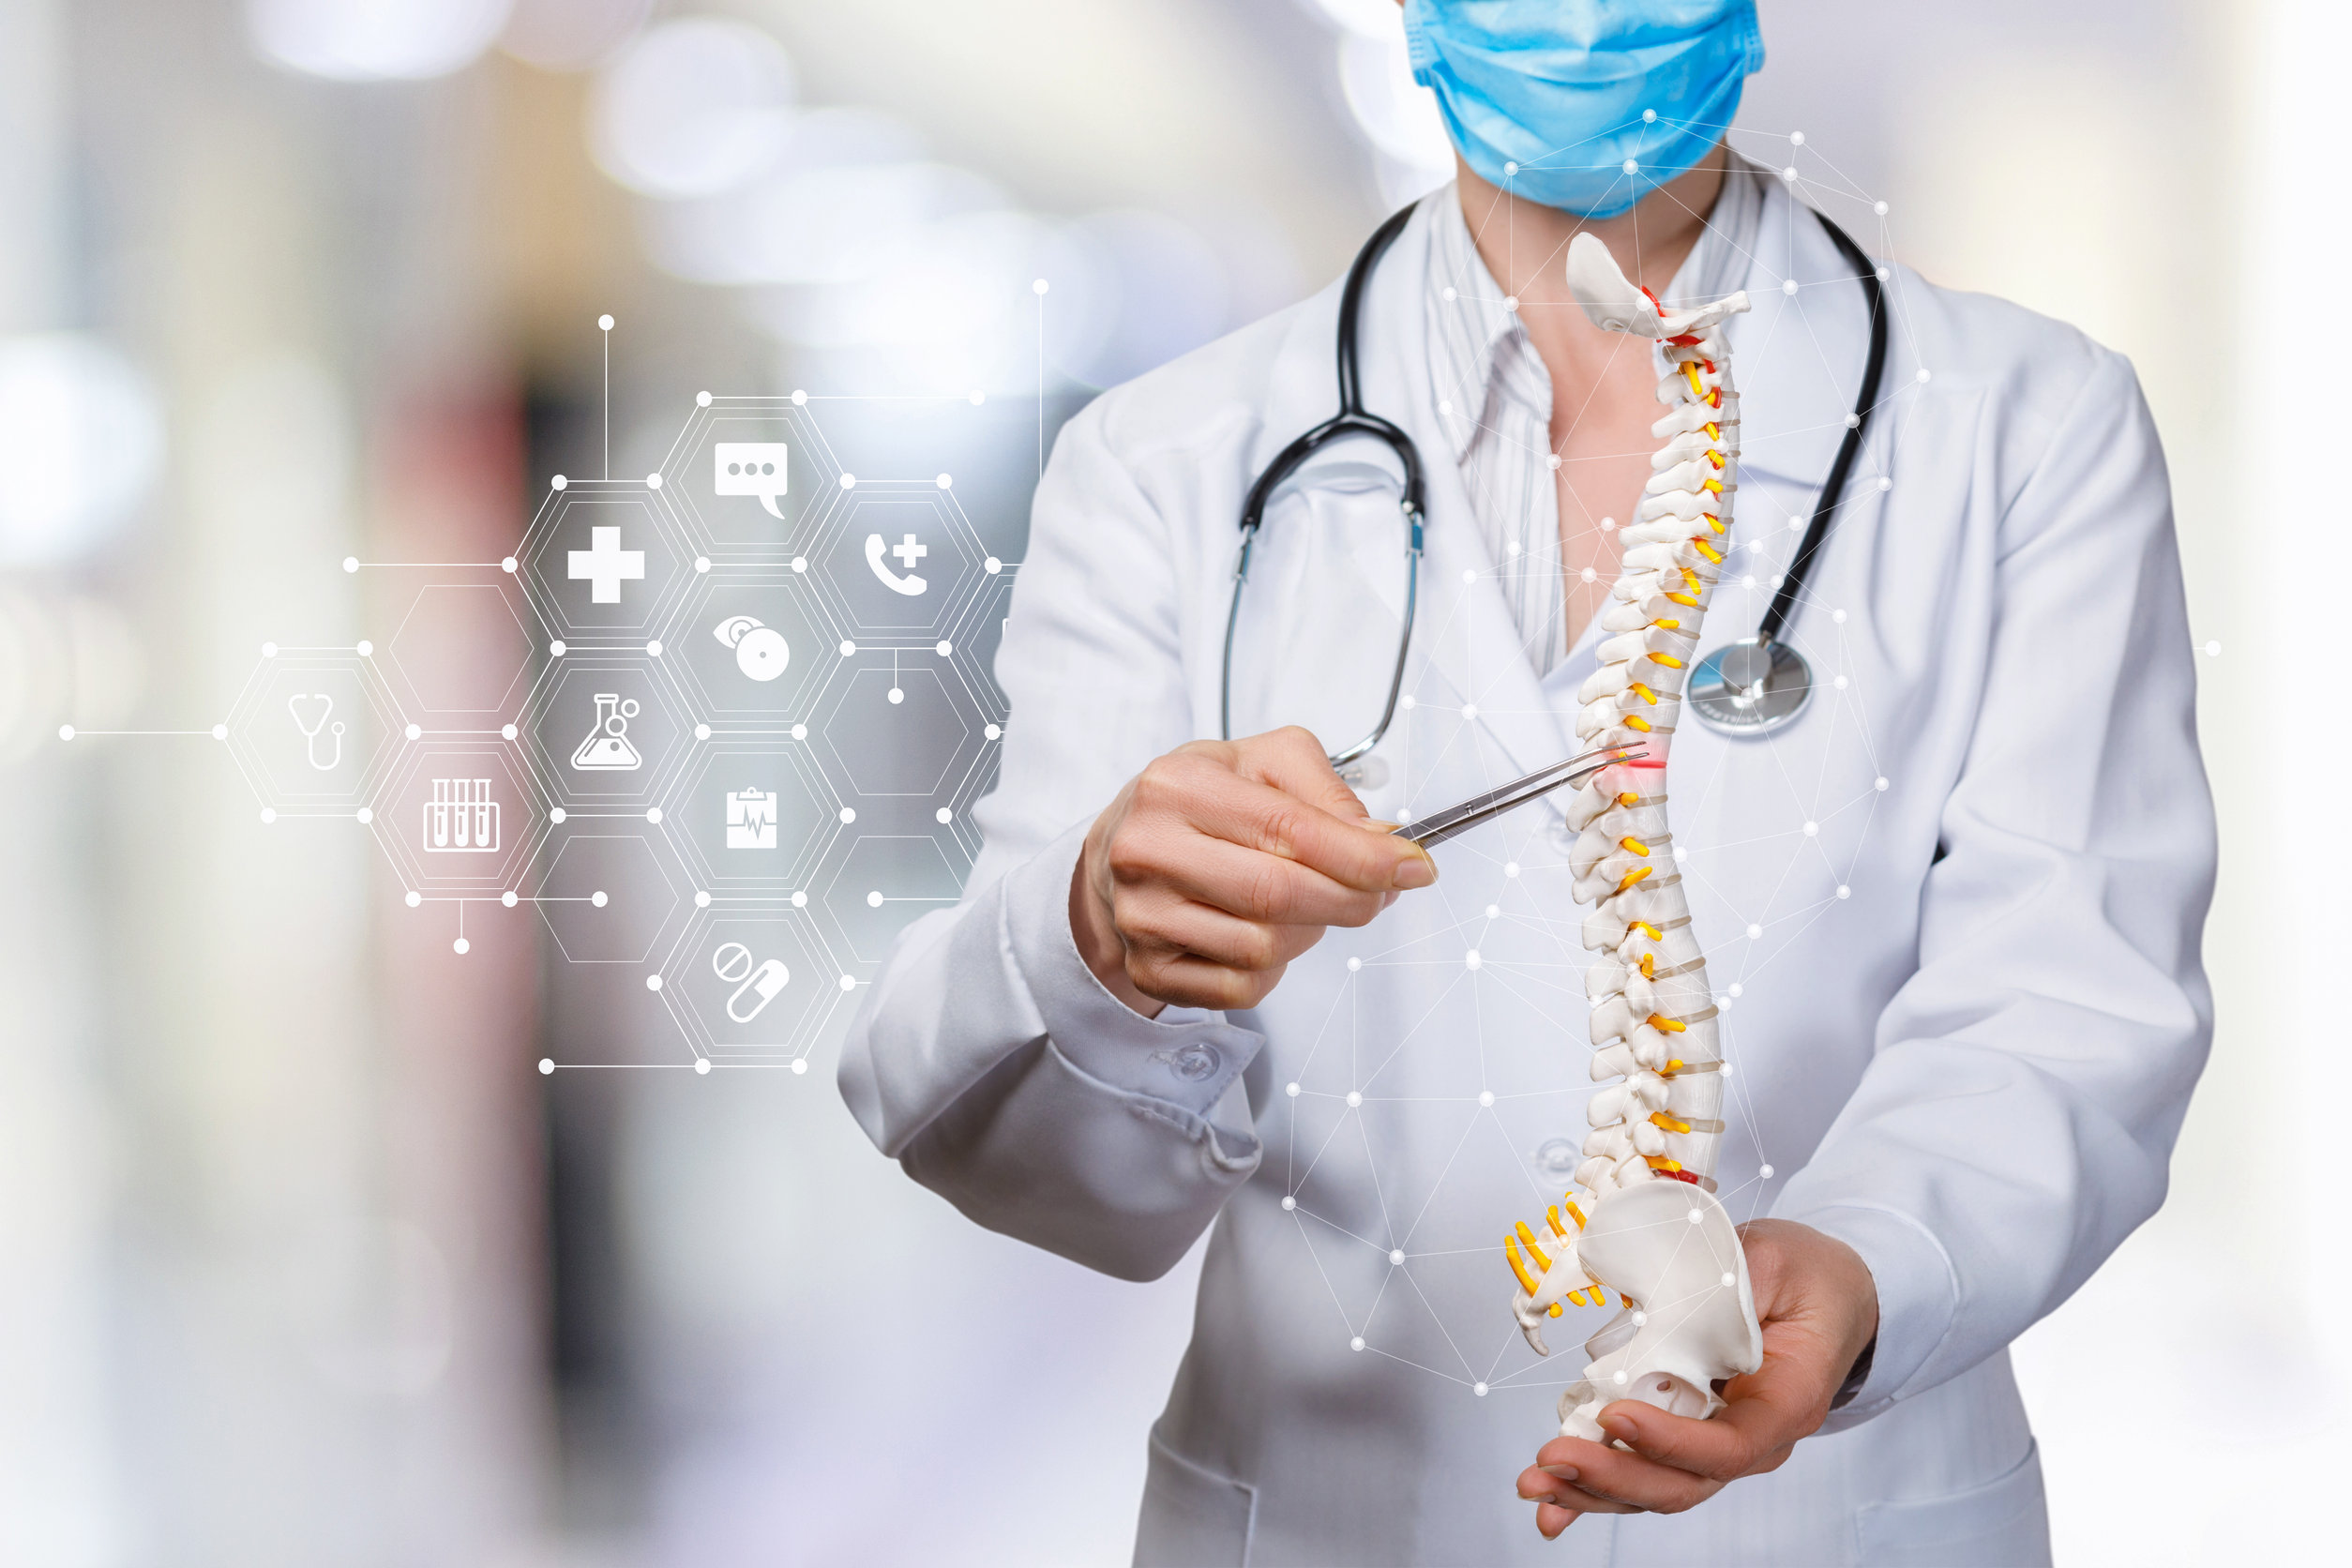 8 Spinal Conditions That May Be Treated Using MISS (Minimally Invasive Spine Surgery)